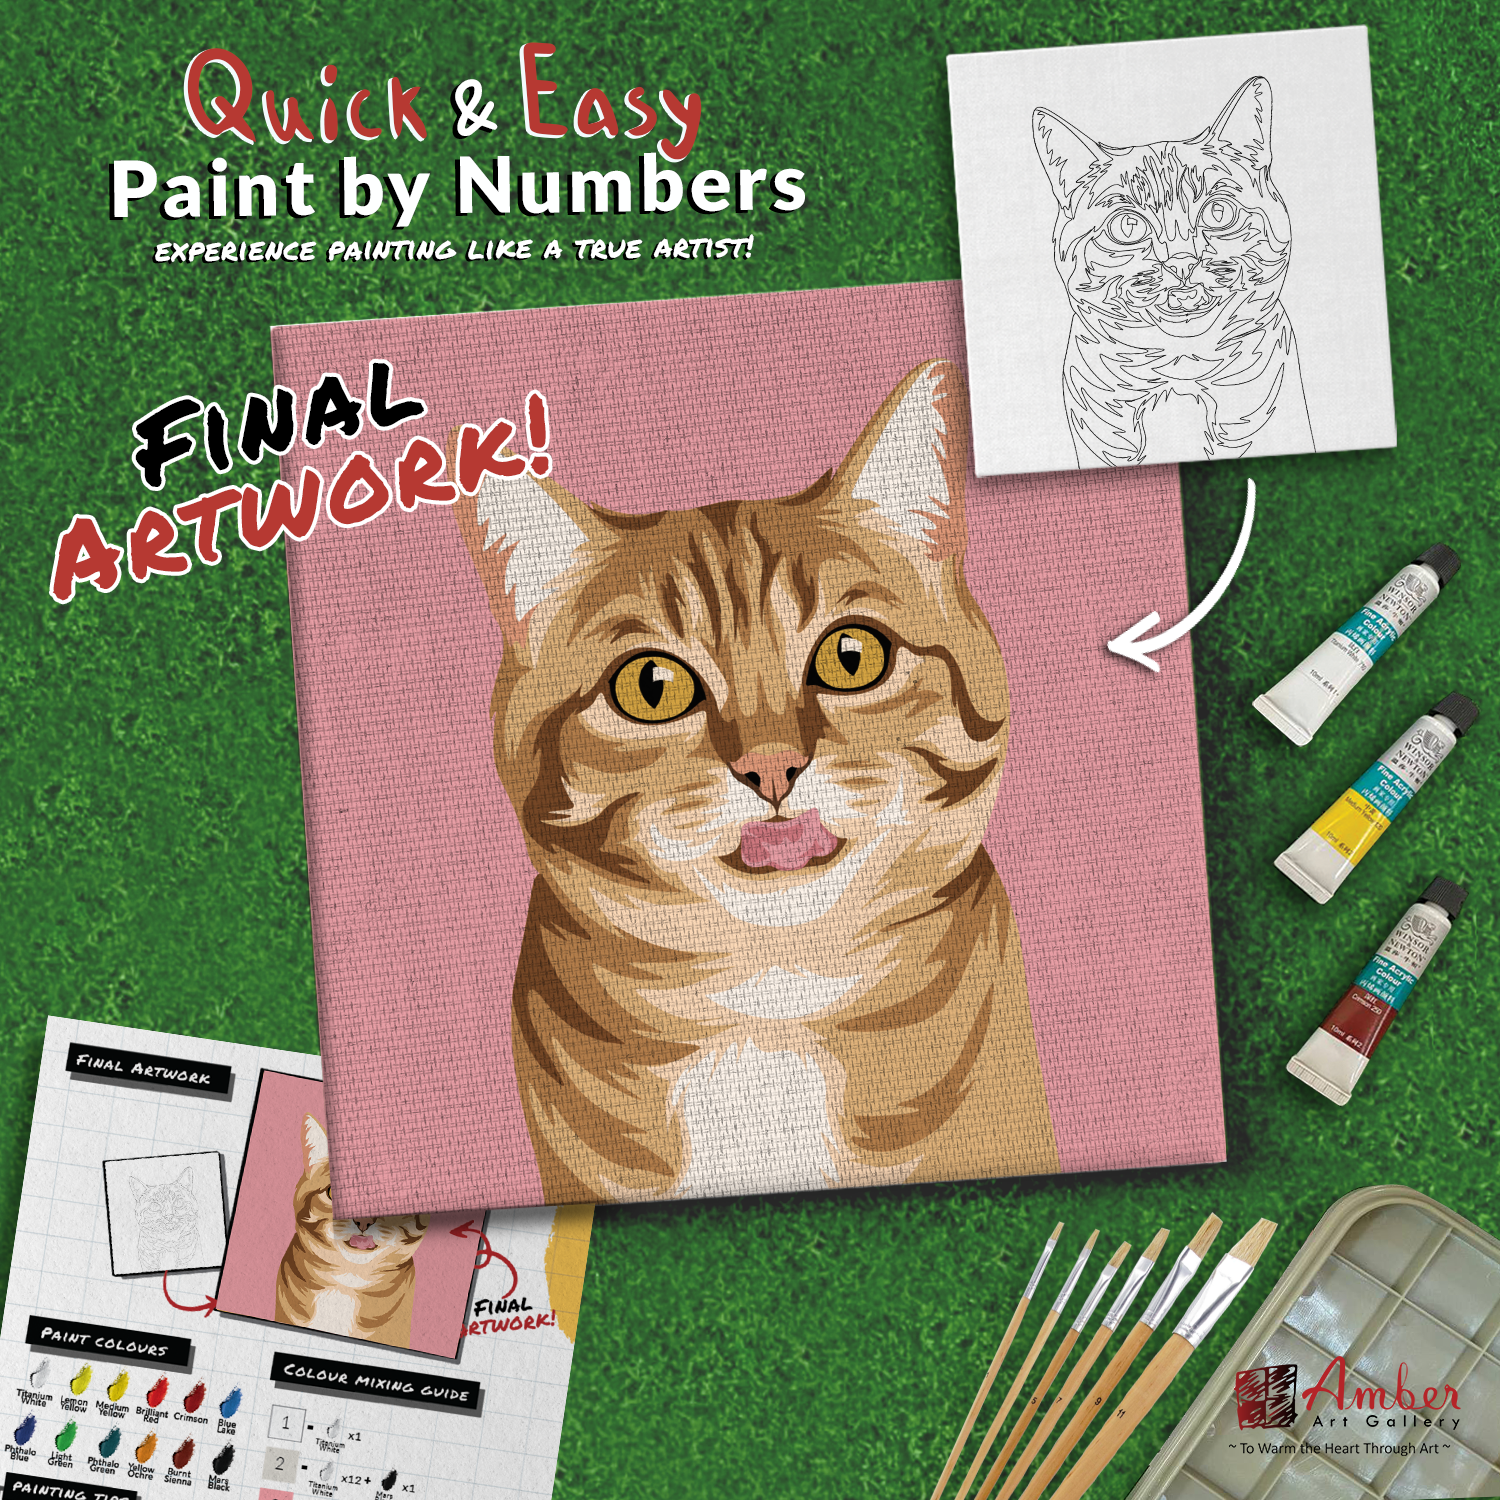 paint-by-numbers-painting-kit-cat-ginger